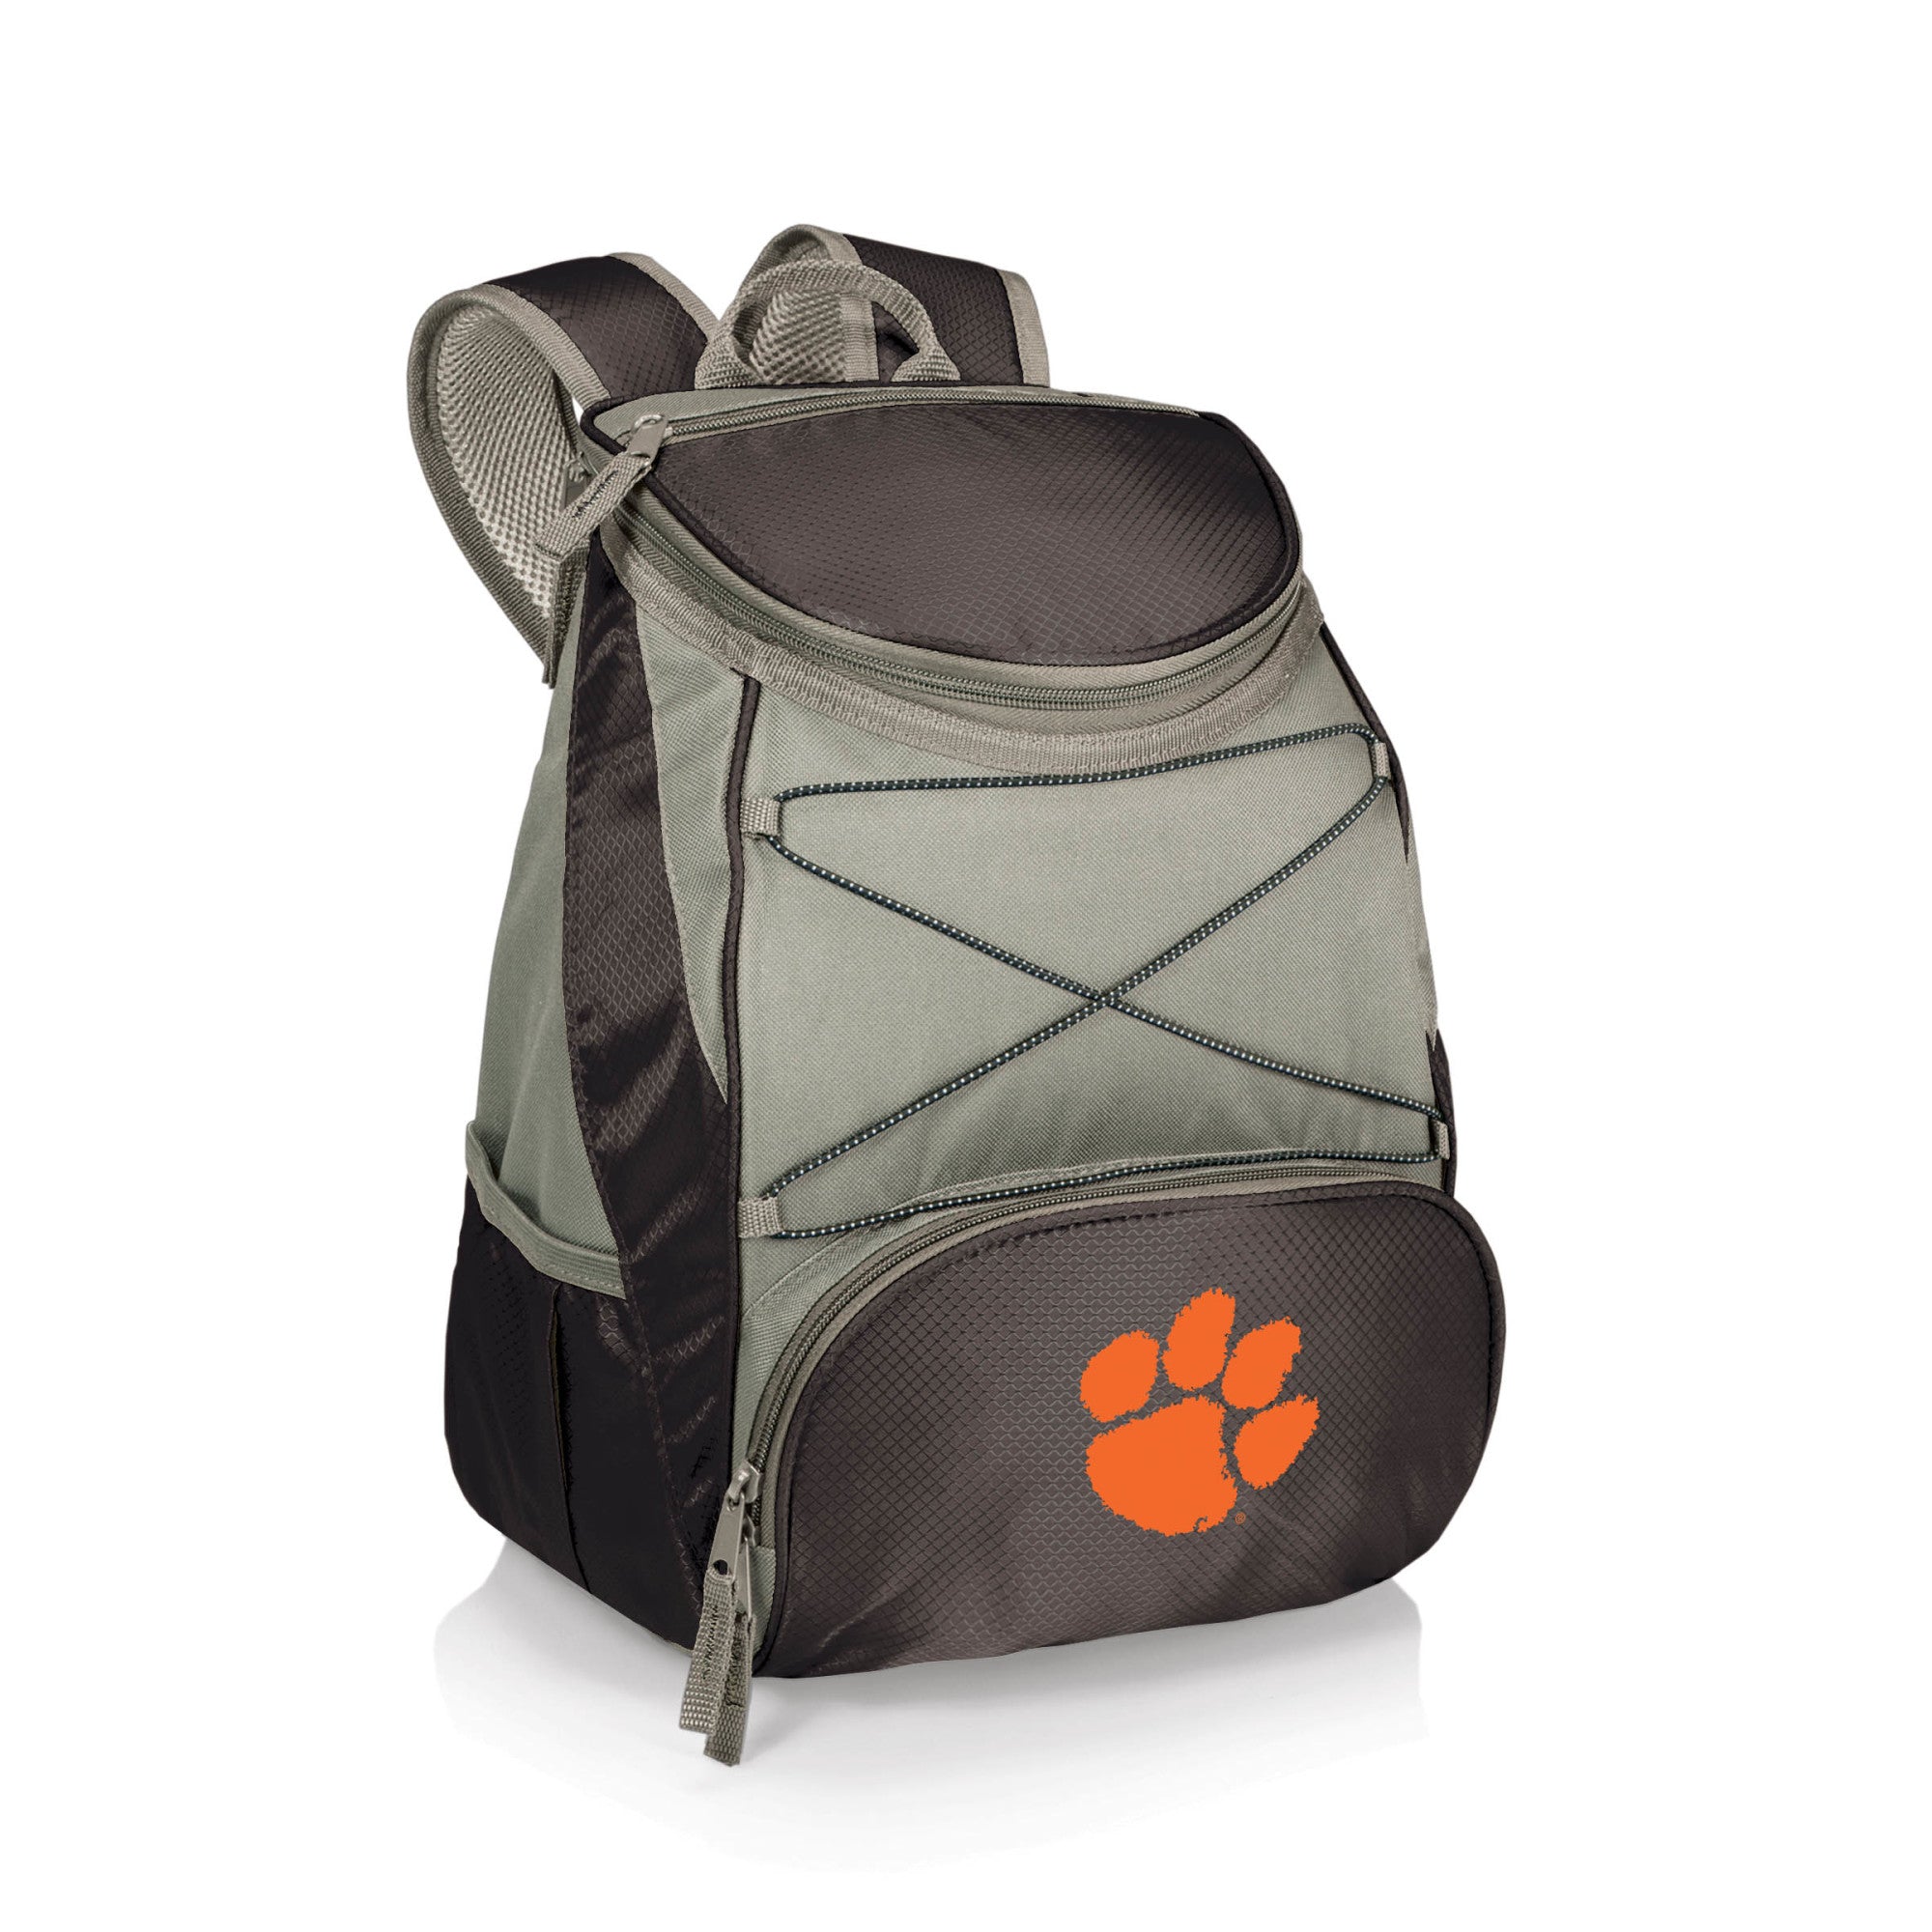 Clemson Tigers - PTX Backpack Cooler, (Black with Gray Accents)